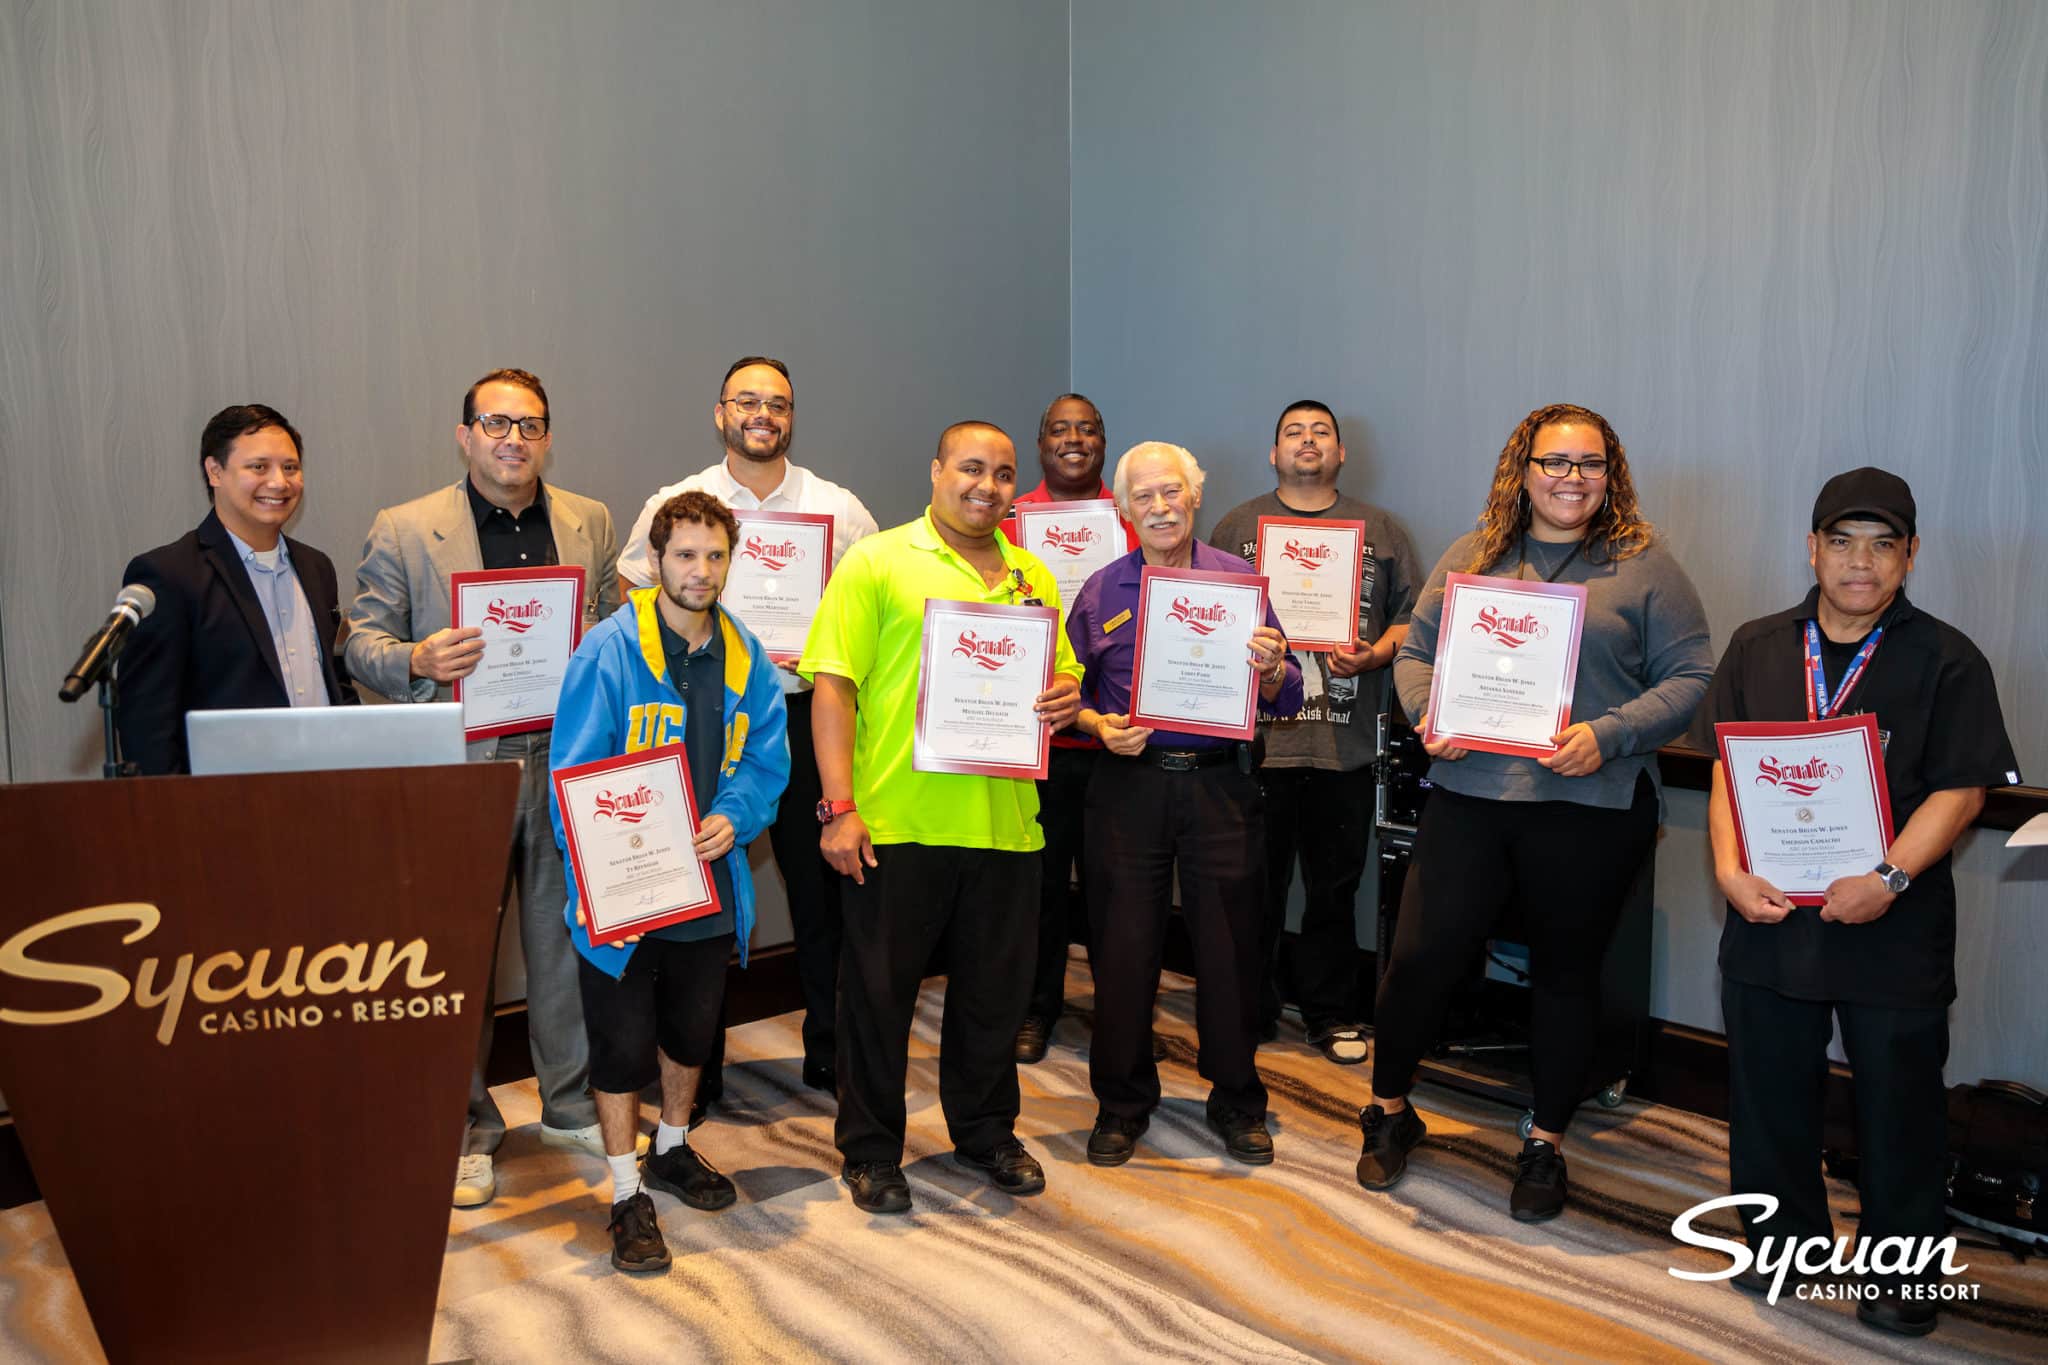 Senator Brian Jones’ office presented each team member and job coach with a certificate. (Chadd Cady / Sycuan Casino Resort)